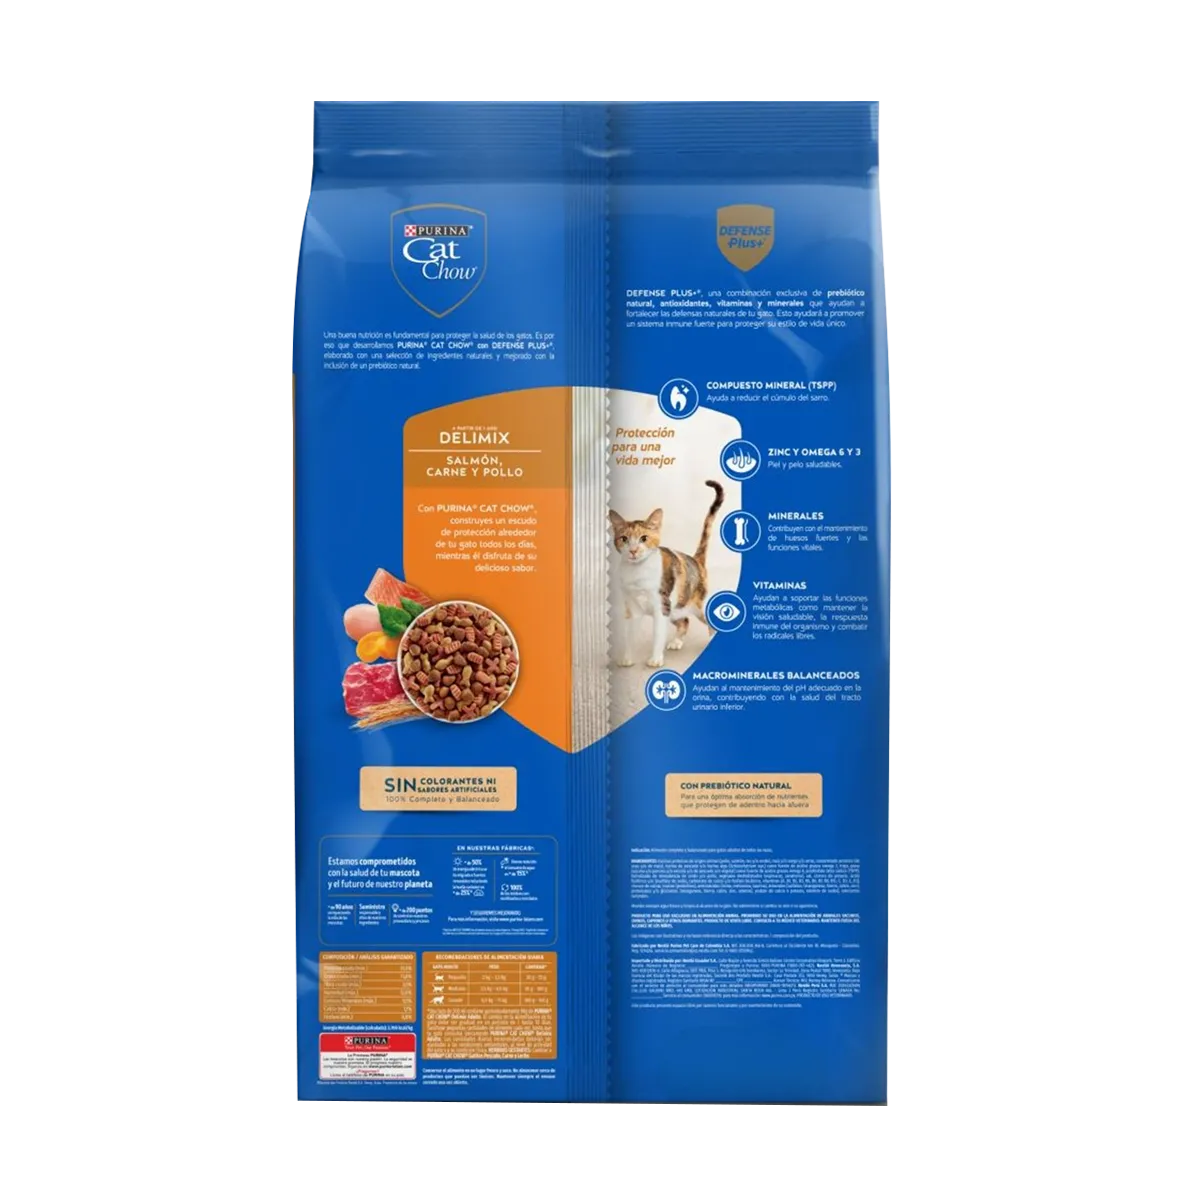 Purina-Cat-Chow-DRY-Delimix-adultos-02